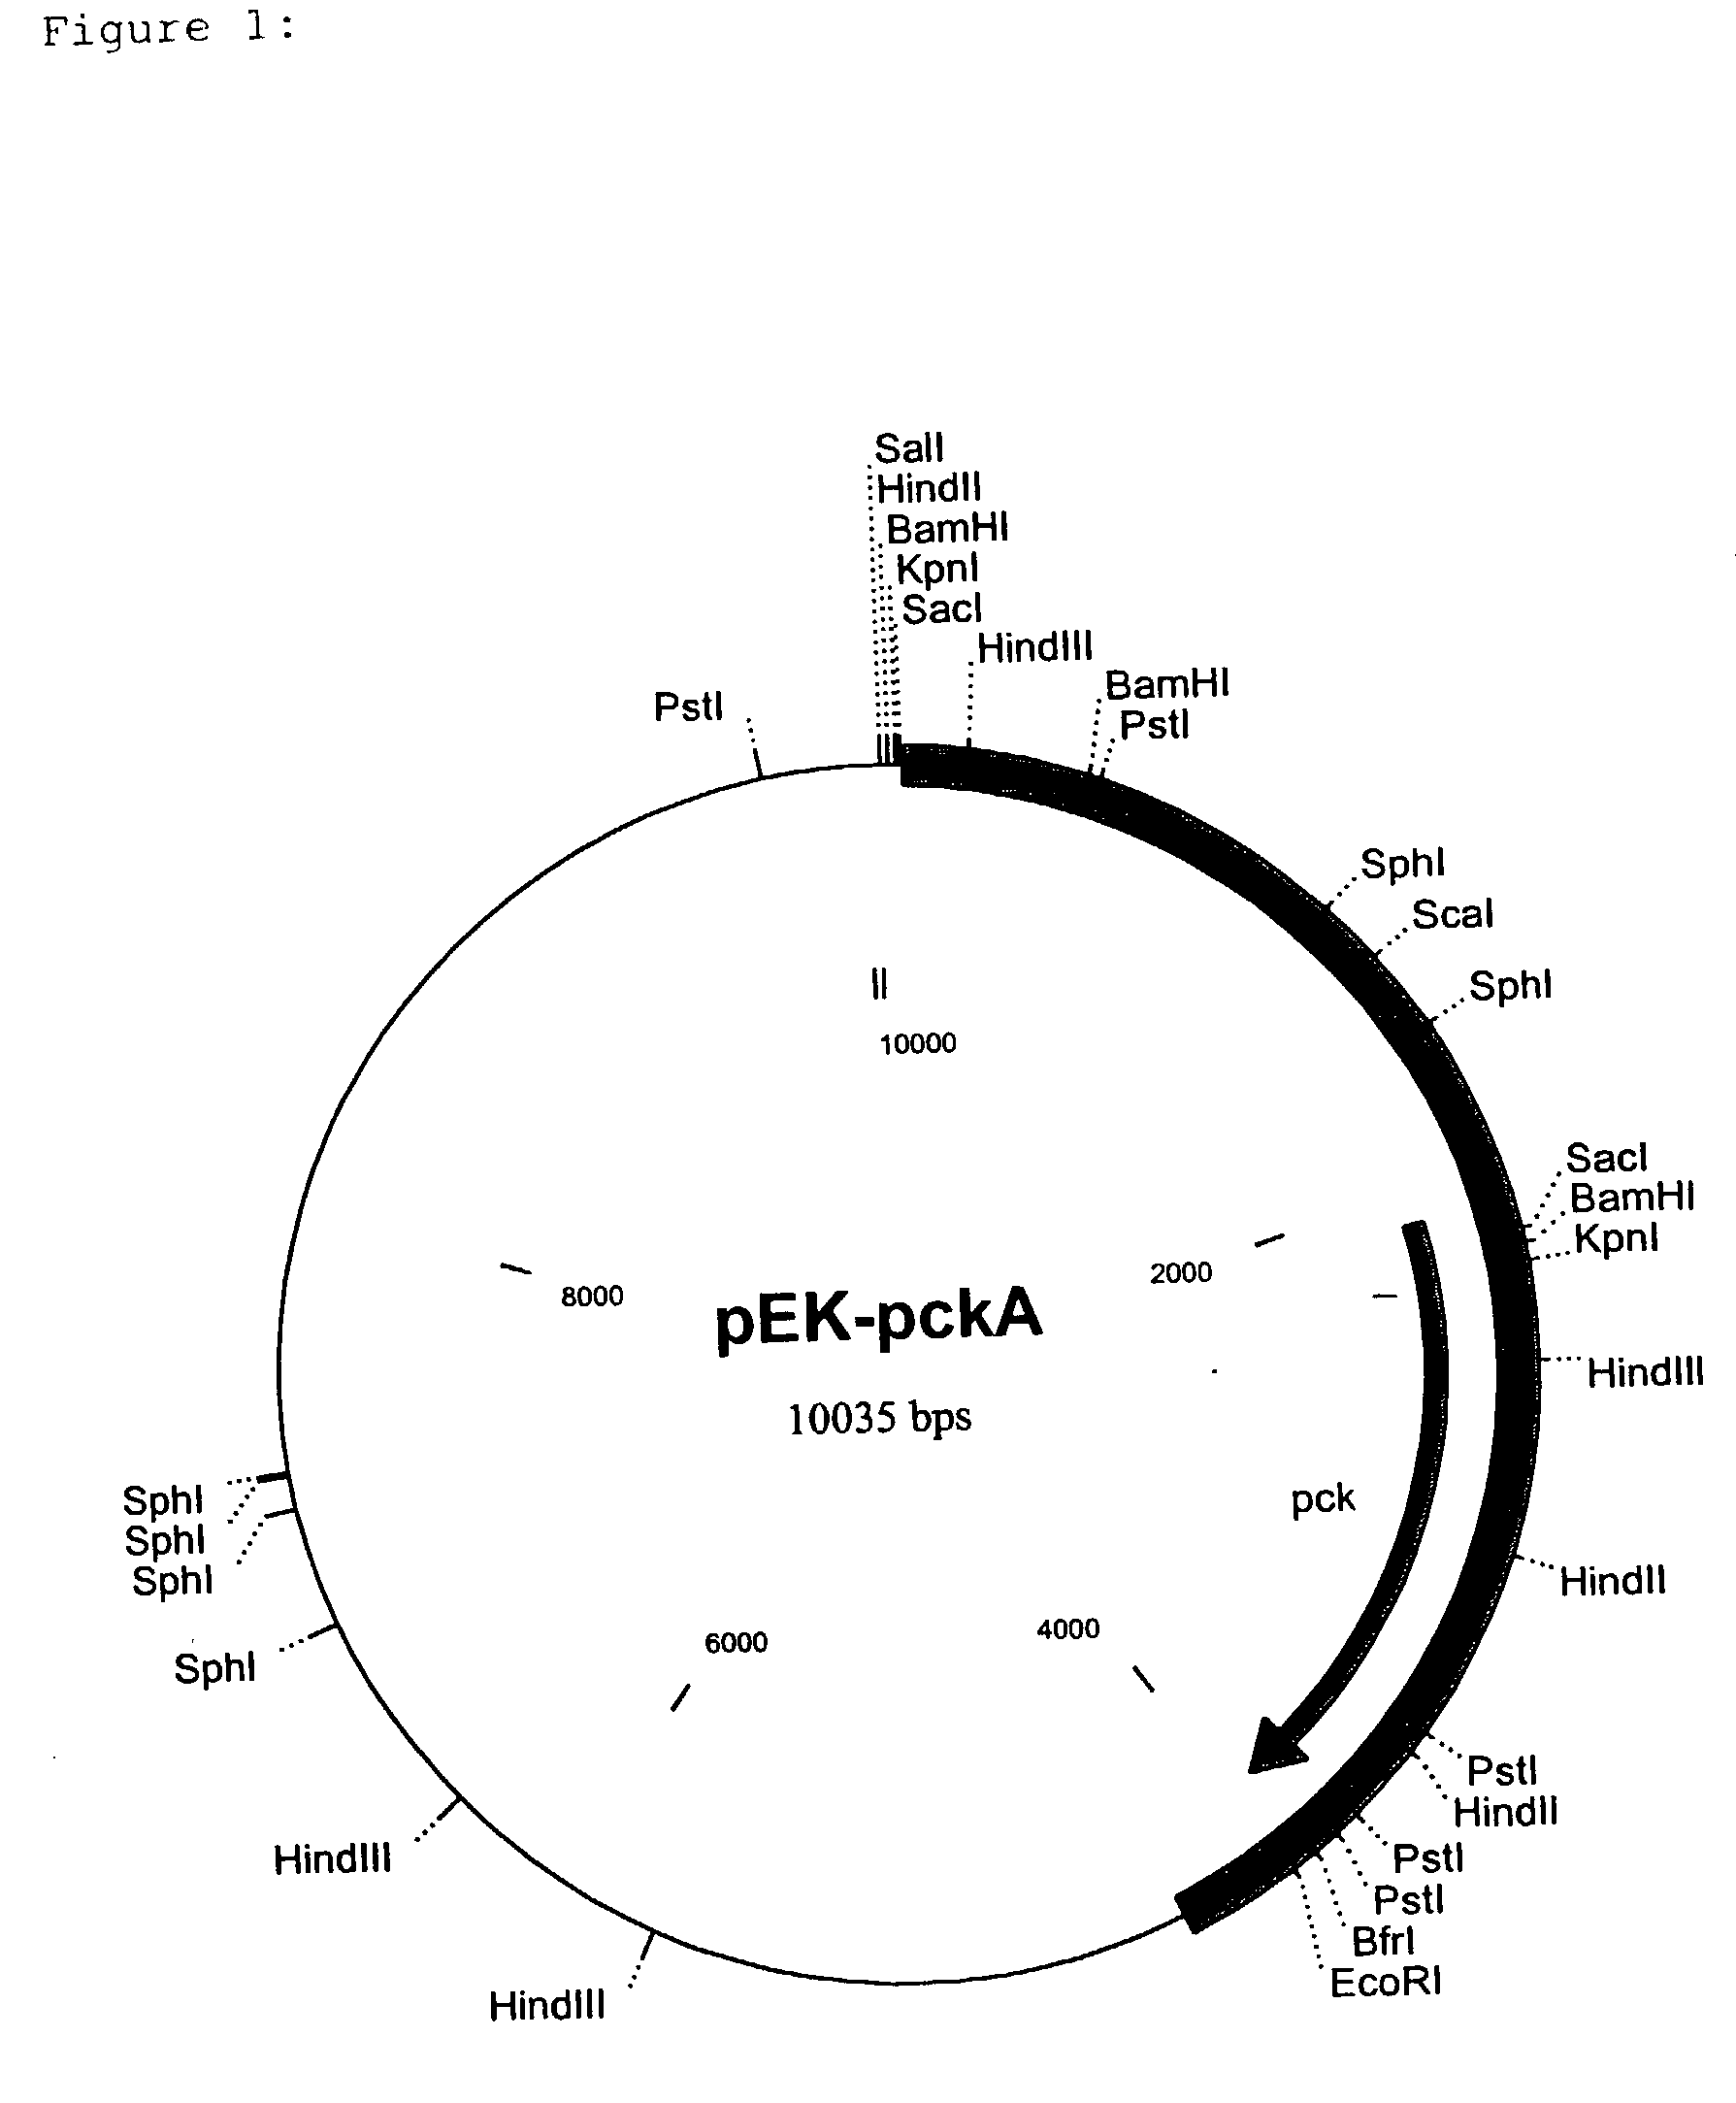 Nucleotide sequences which code for the pck gene